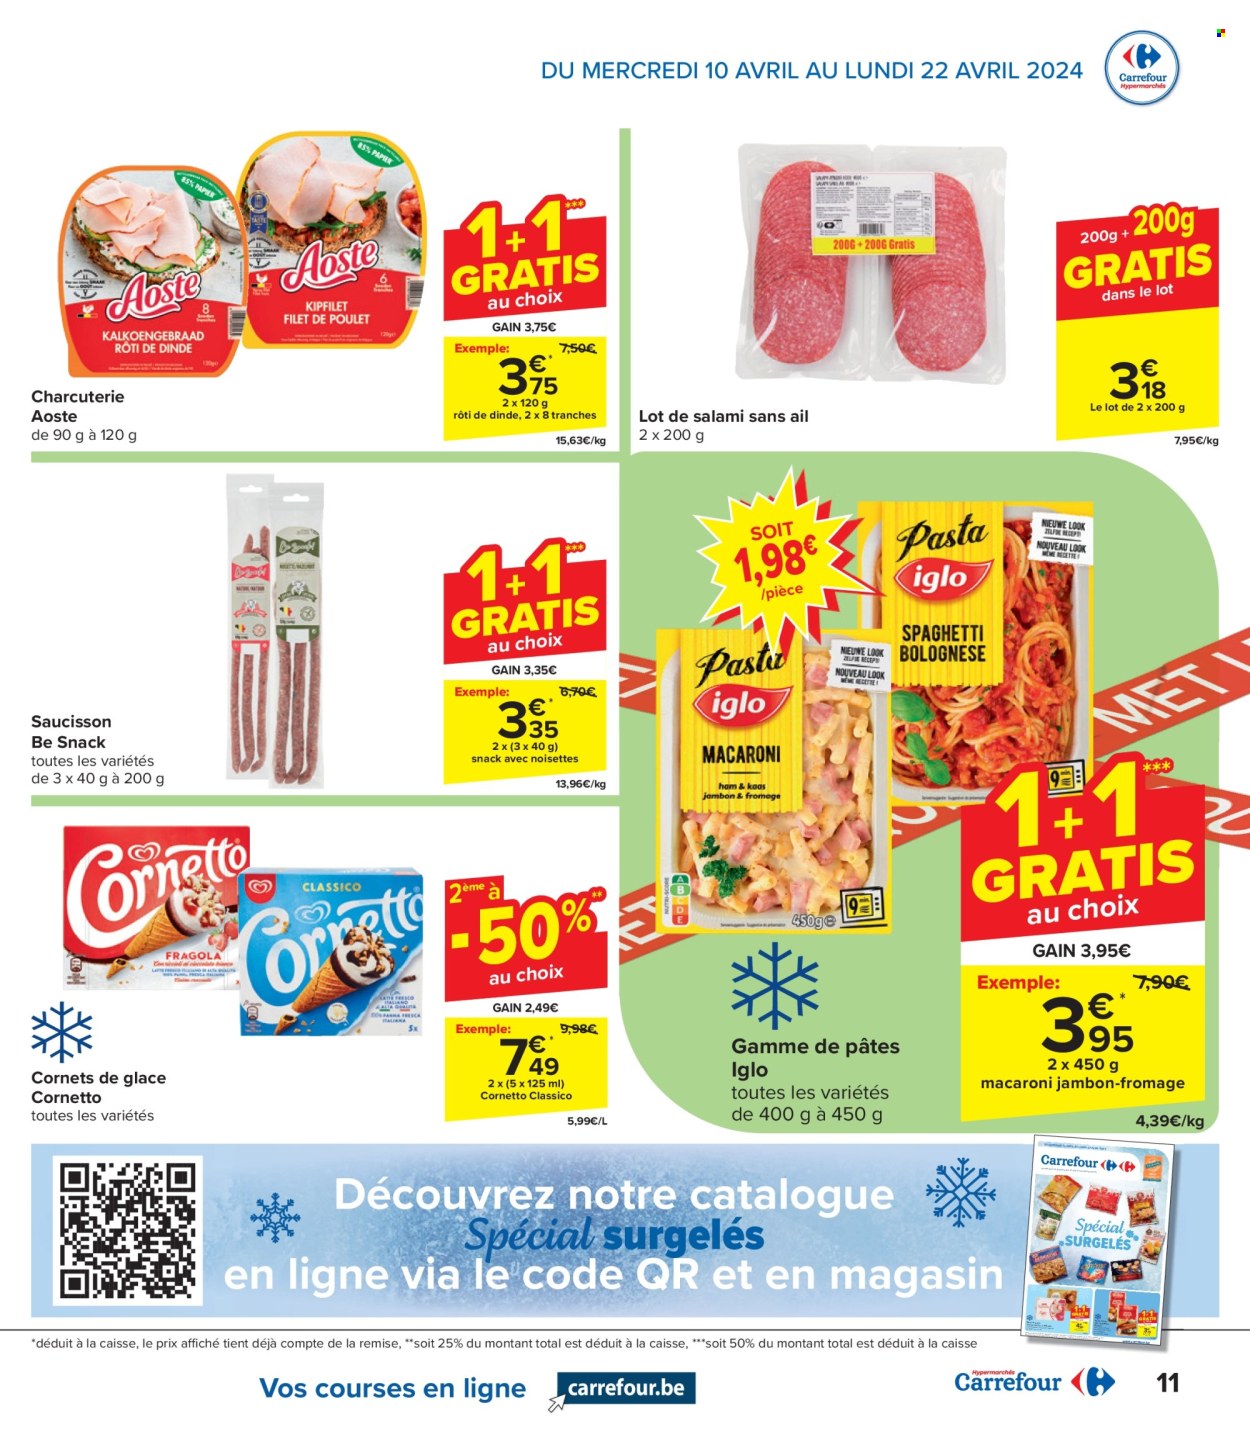 Catalogue Carrefour hypermarkt - 10.4.2024 - 22.4.2024. Page 11.